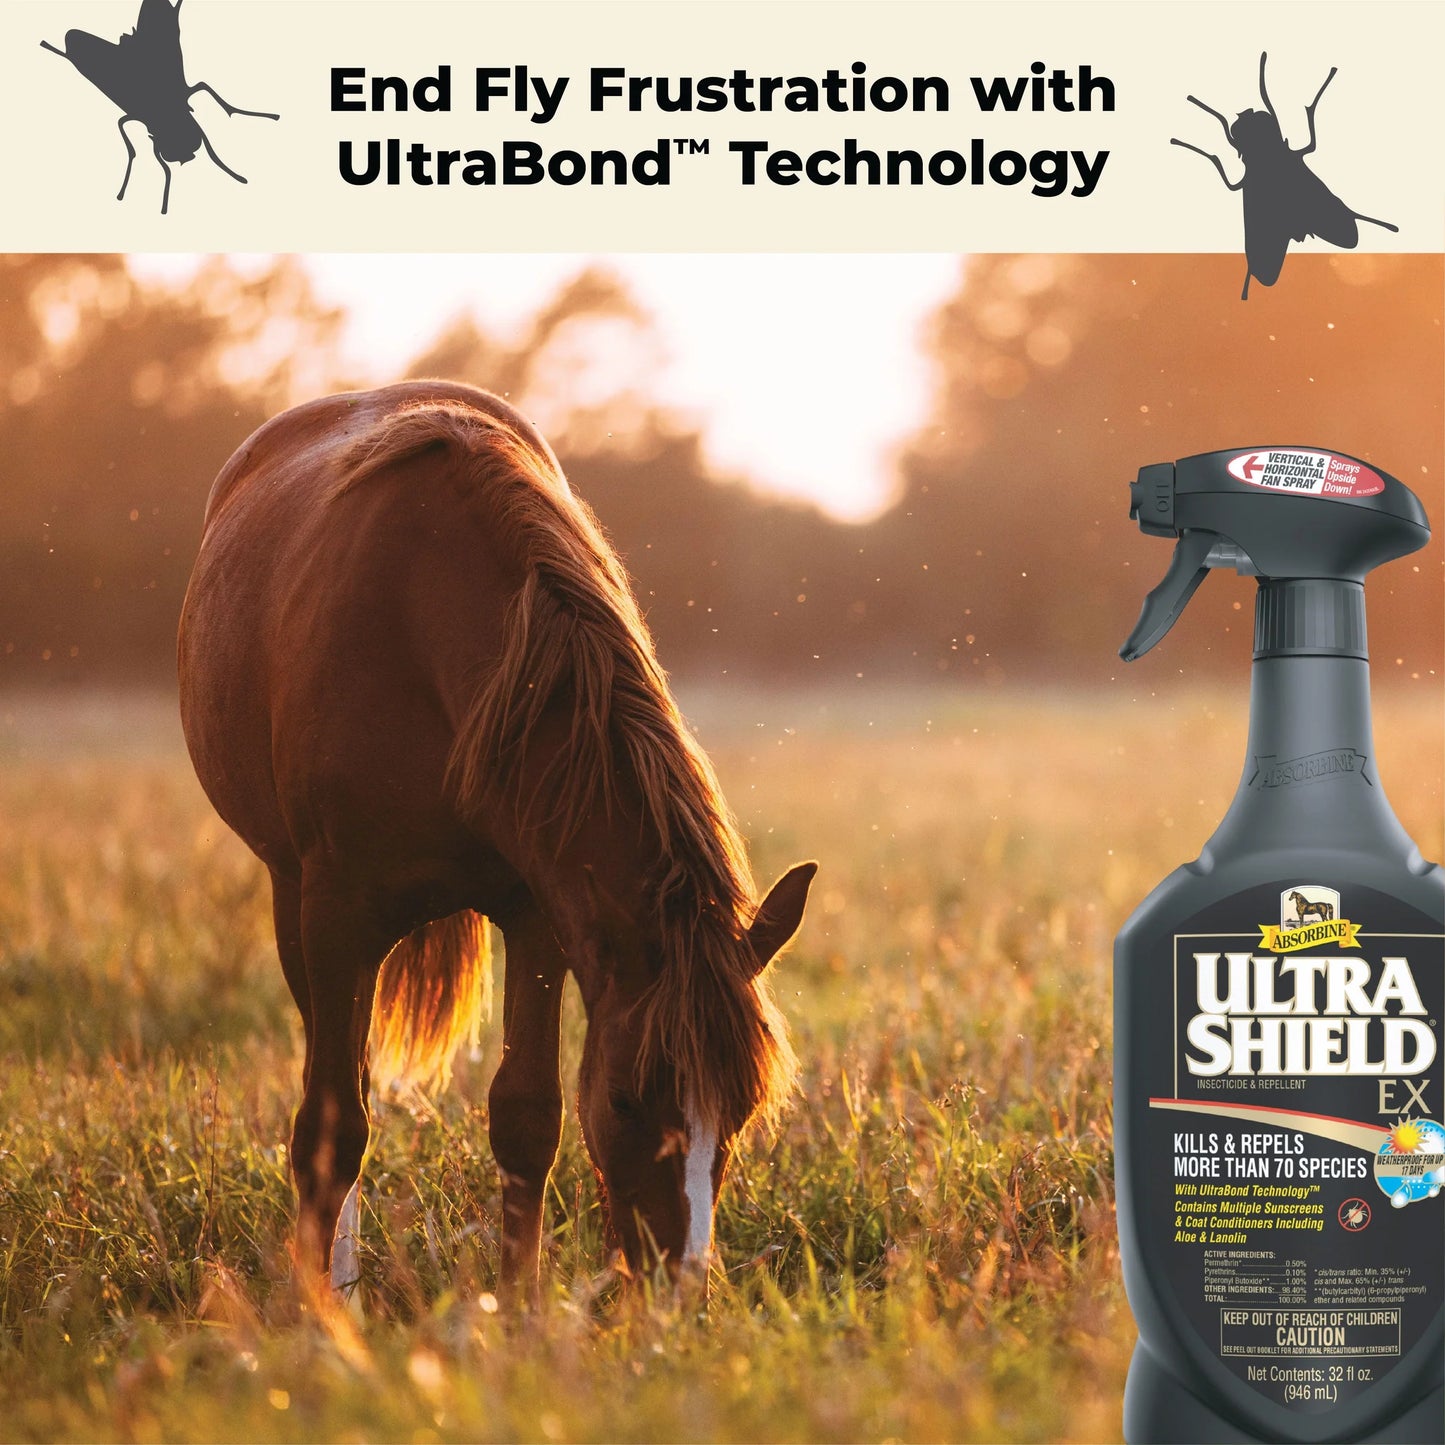 Absorbine UltraShield® EX Insecticide & Repellent Spray, Insect Repellent